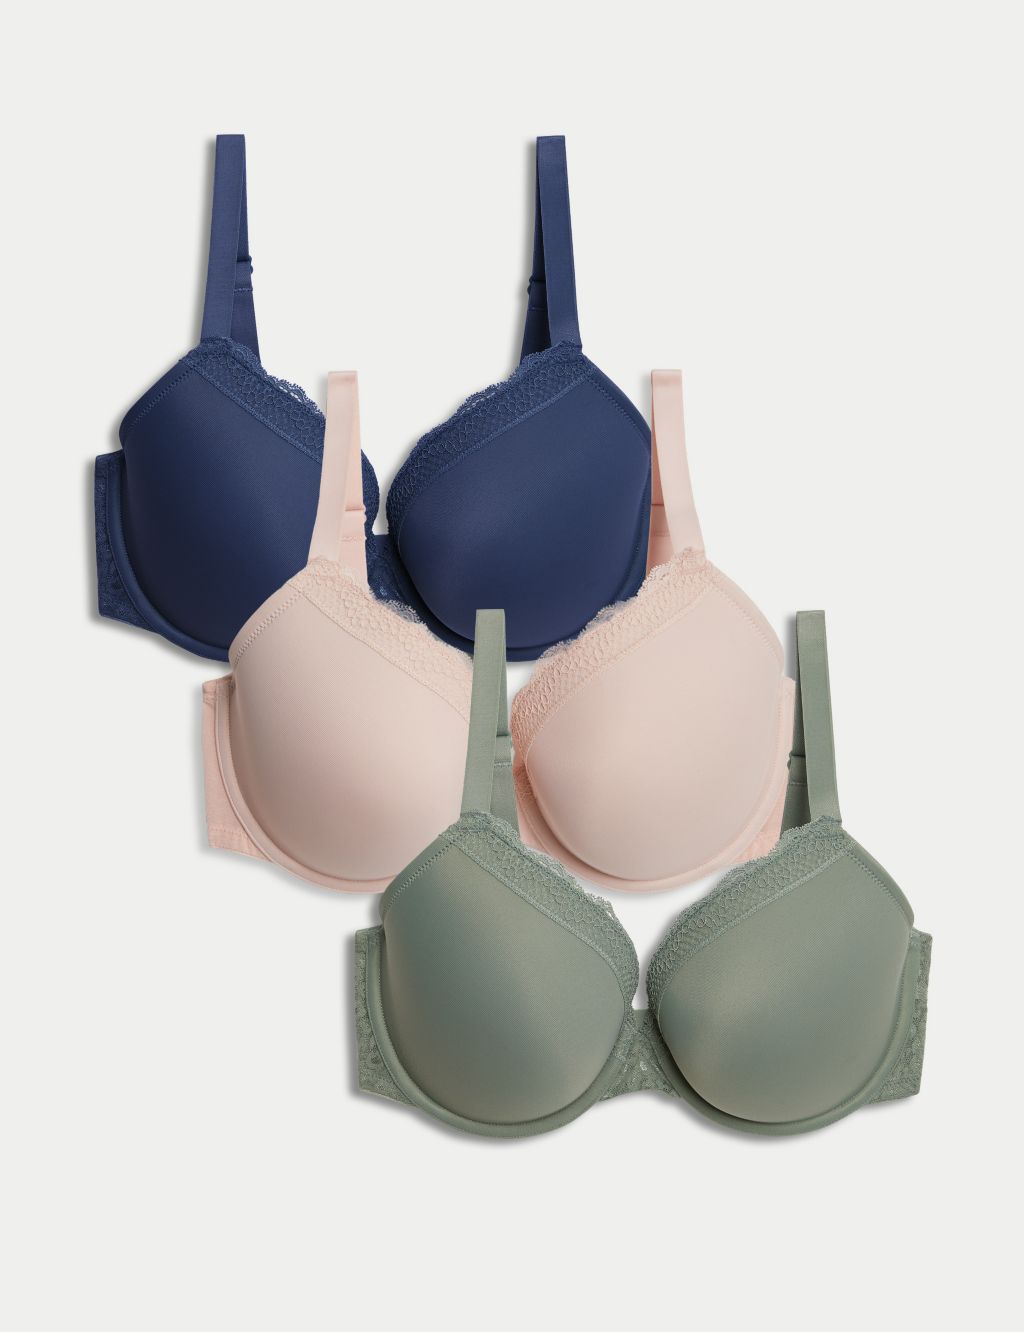 X 上的Joburg's Plus-size Bra Fitting Specialist：「@AldrinSampear We sell Big  Cup Bras,we stock upto size M,for all your Bra needs please contact us on  0835961020  / X